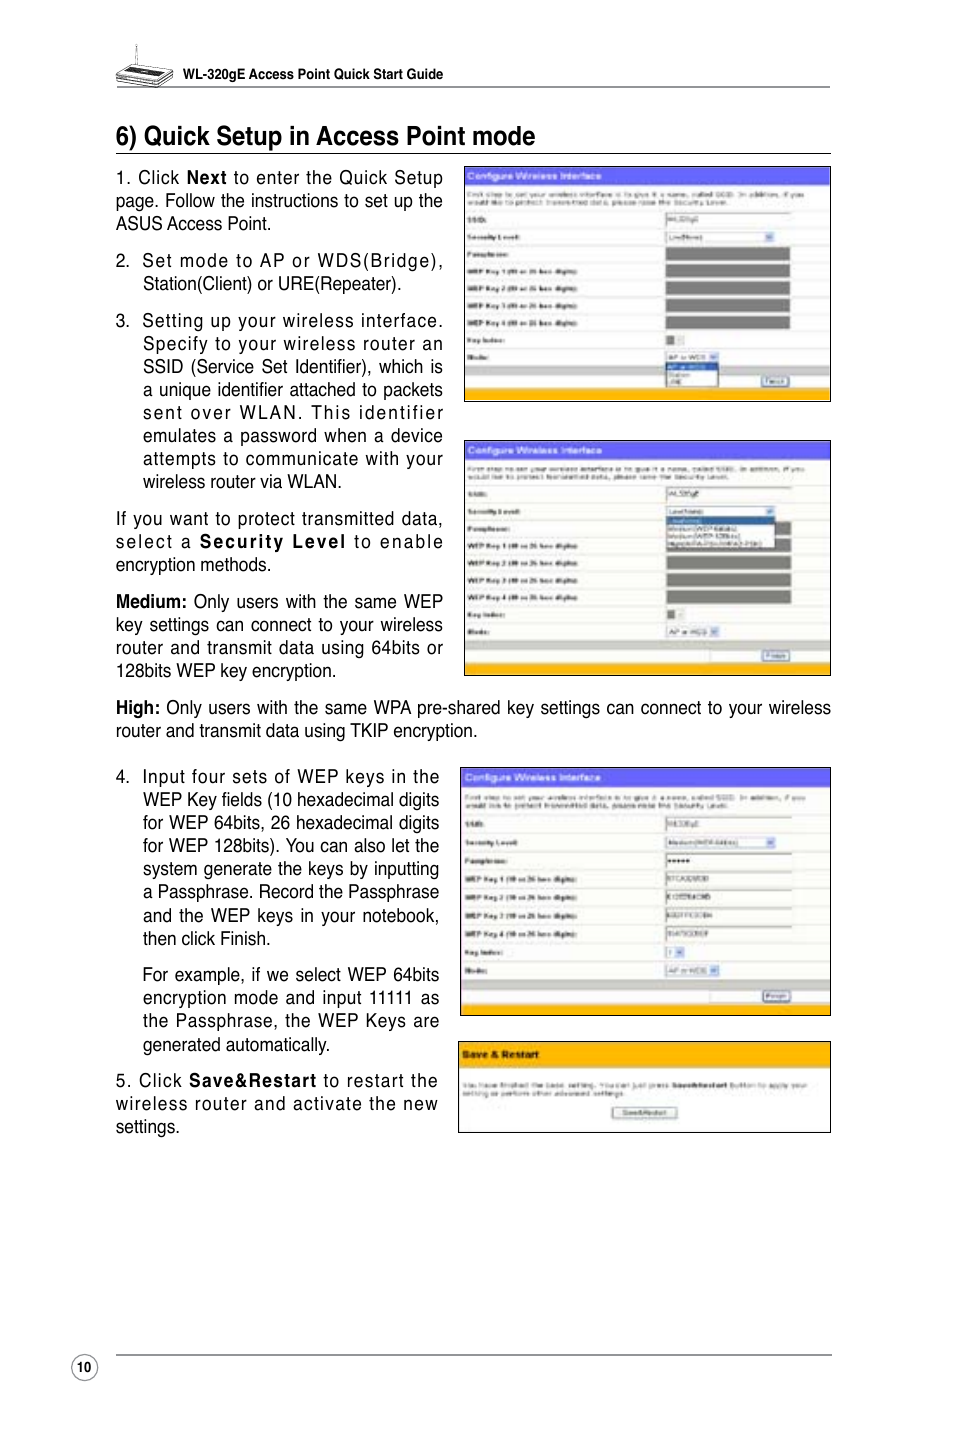 6) quick setup in access point mode | Asus WL-320gE User Manual | Page 12 /  20